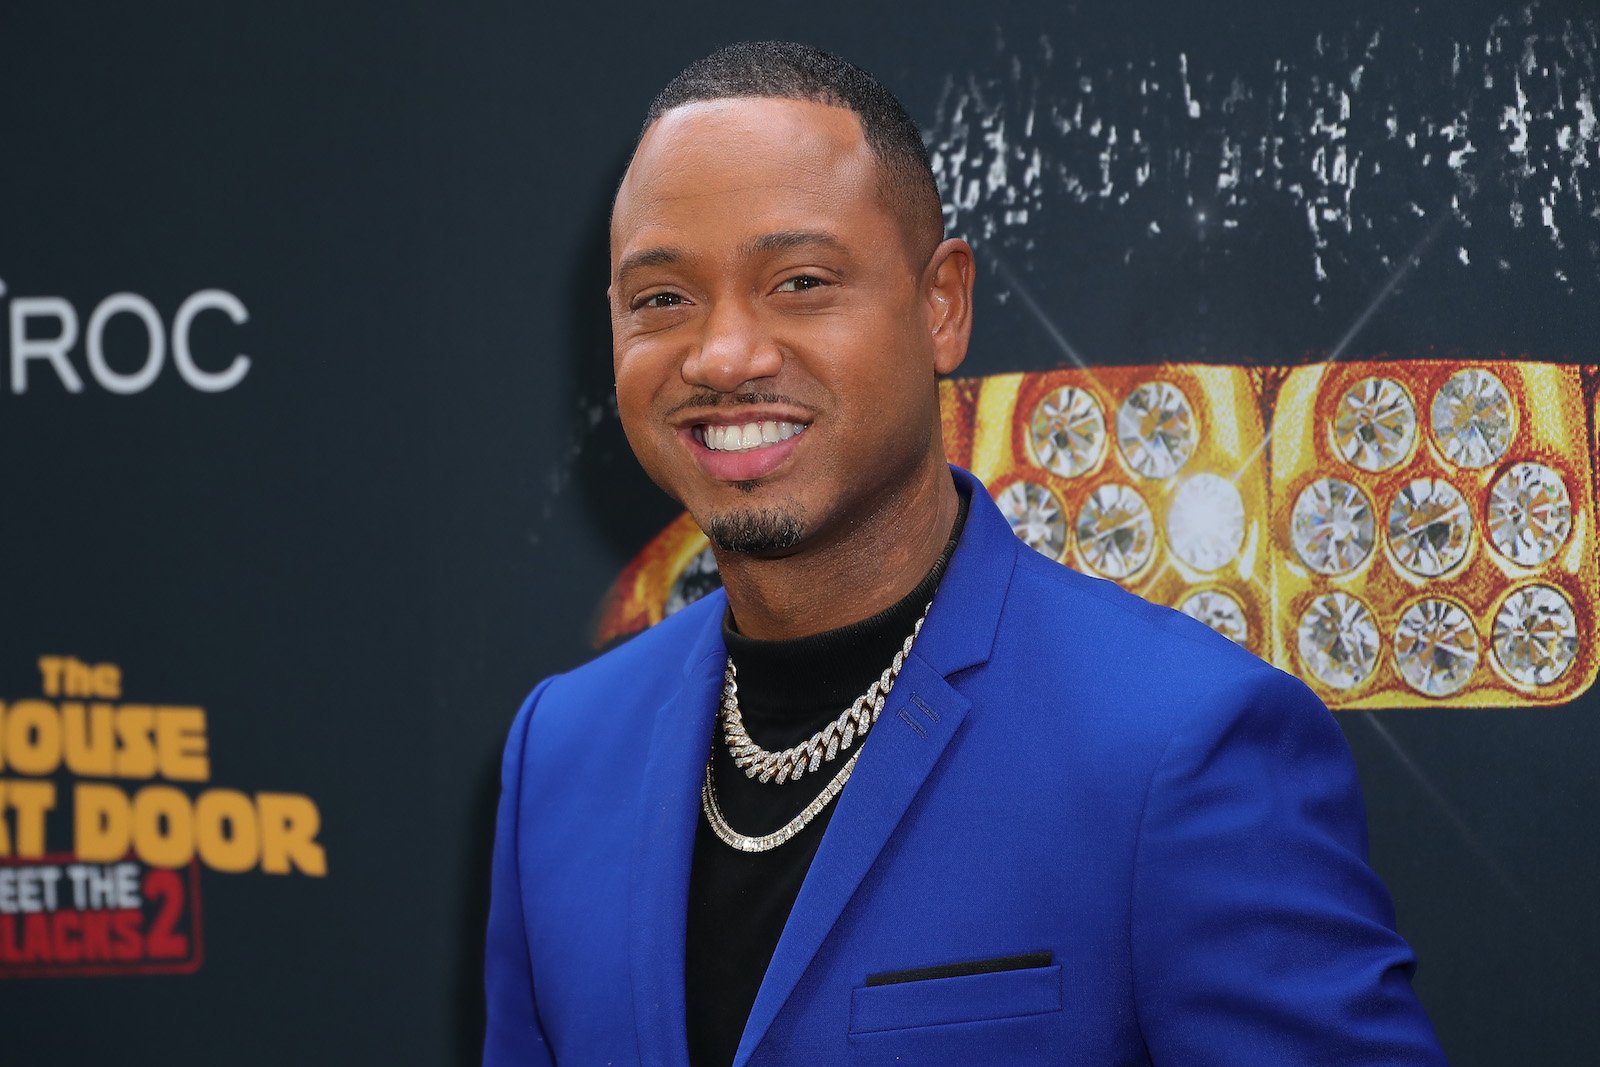 Terrence J appeared at the Black Carpet Premiere in 2021